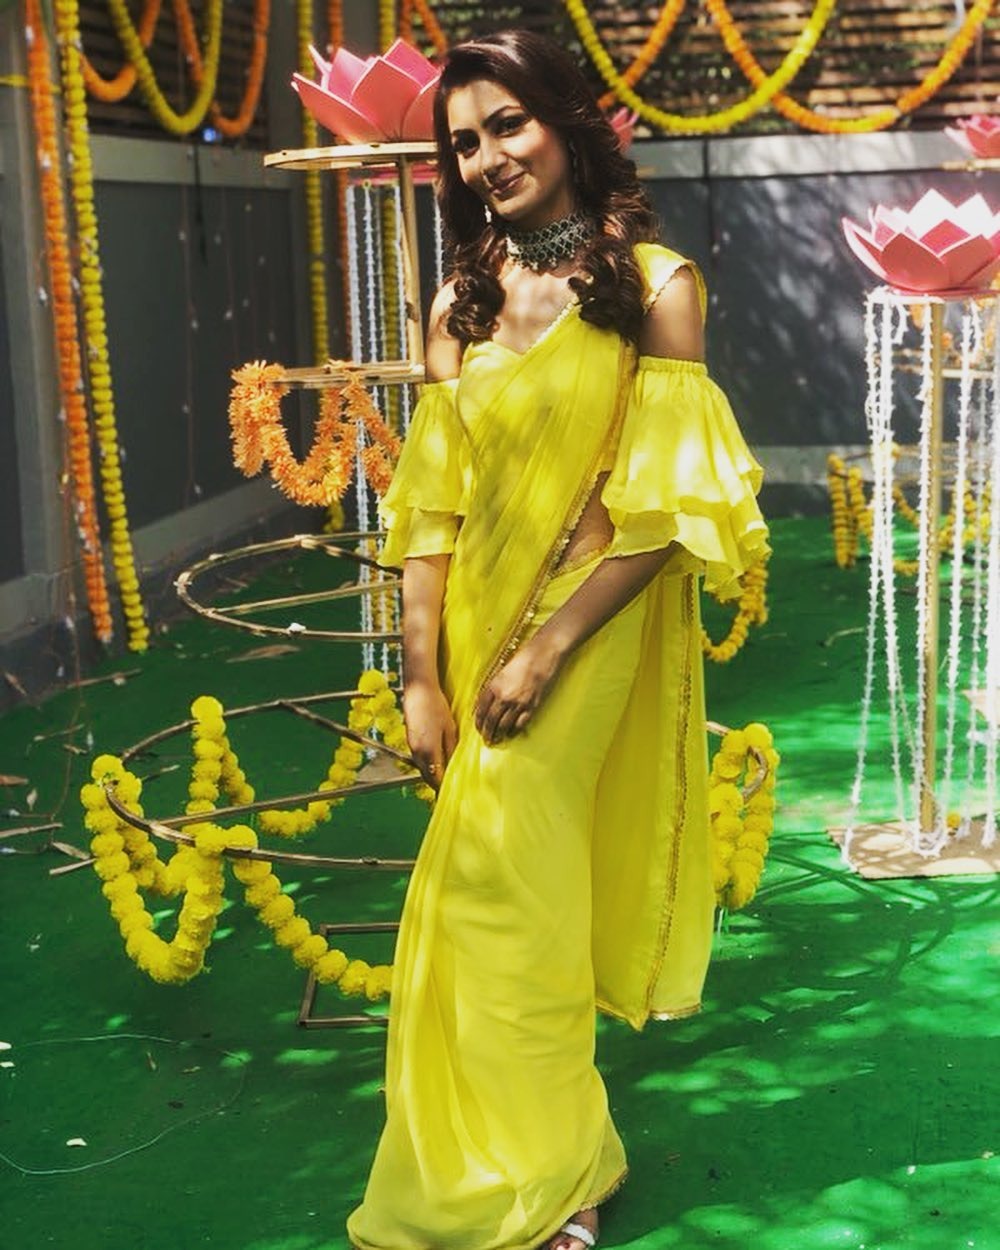 Rupali Ganguly and Sriti Jha looked beautiful in yellow sari, fans expressed their love 2961